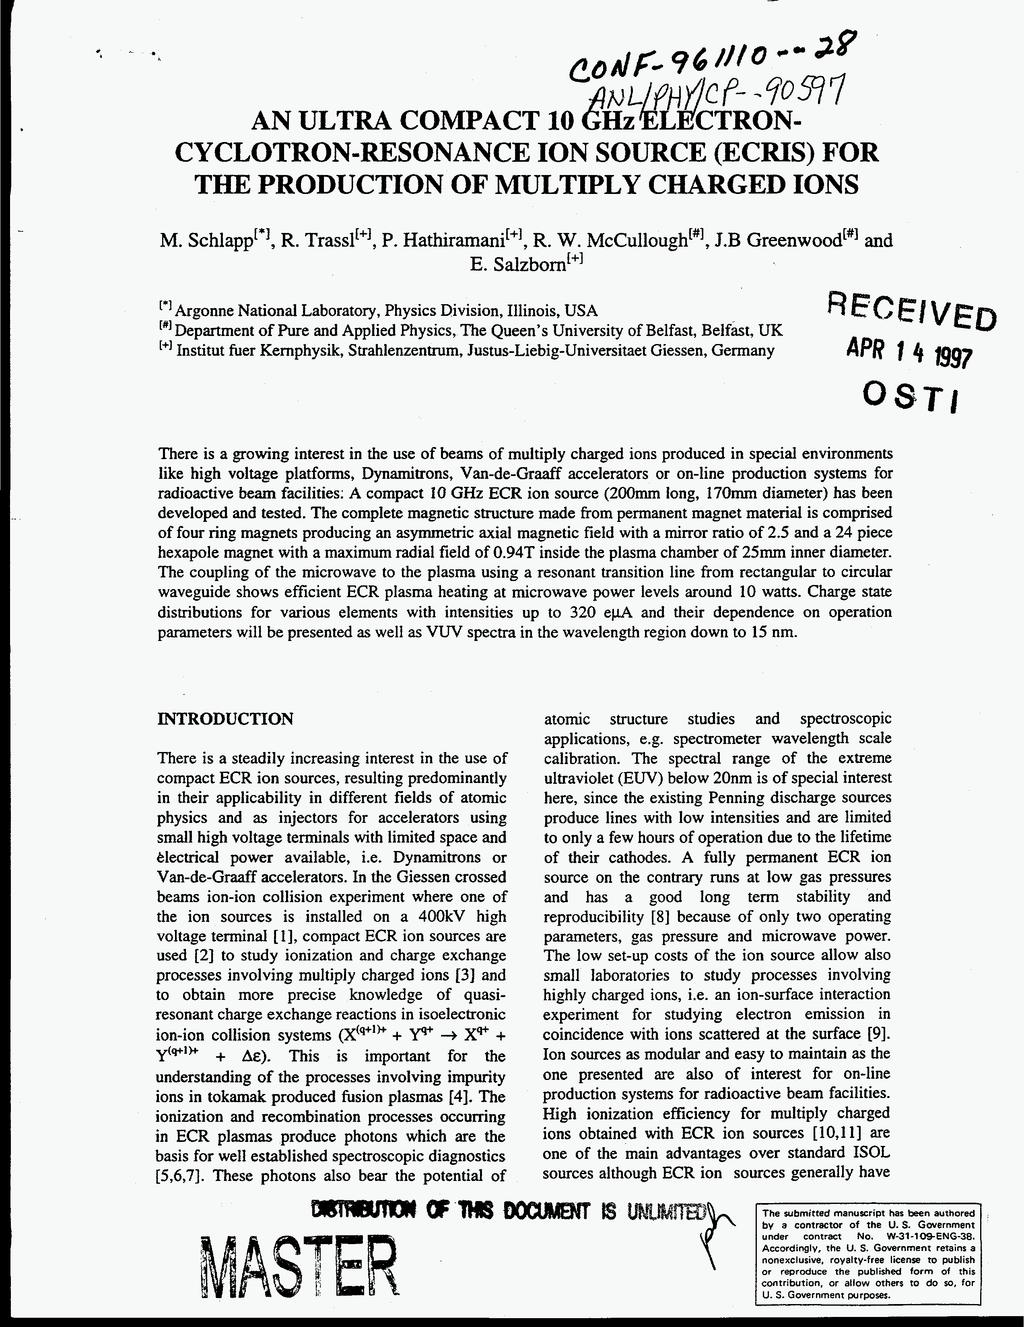 CYCLOTRON-RESONANCE ION SOURCE (ECRIS) FOR THE PRODUCTION OF MULTIPLY CHARGED IONS M. Schlapp'*], R. Trassl[+', P. Hathirammi[*], R. W. McCullough"], J.B Greenwood[#] and E.